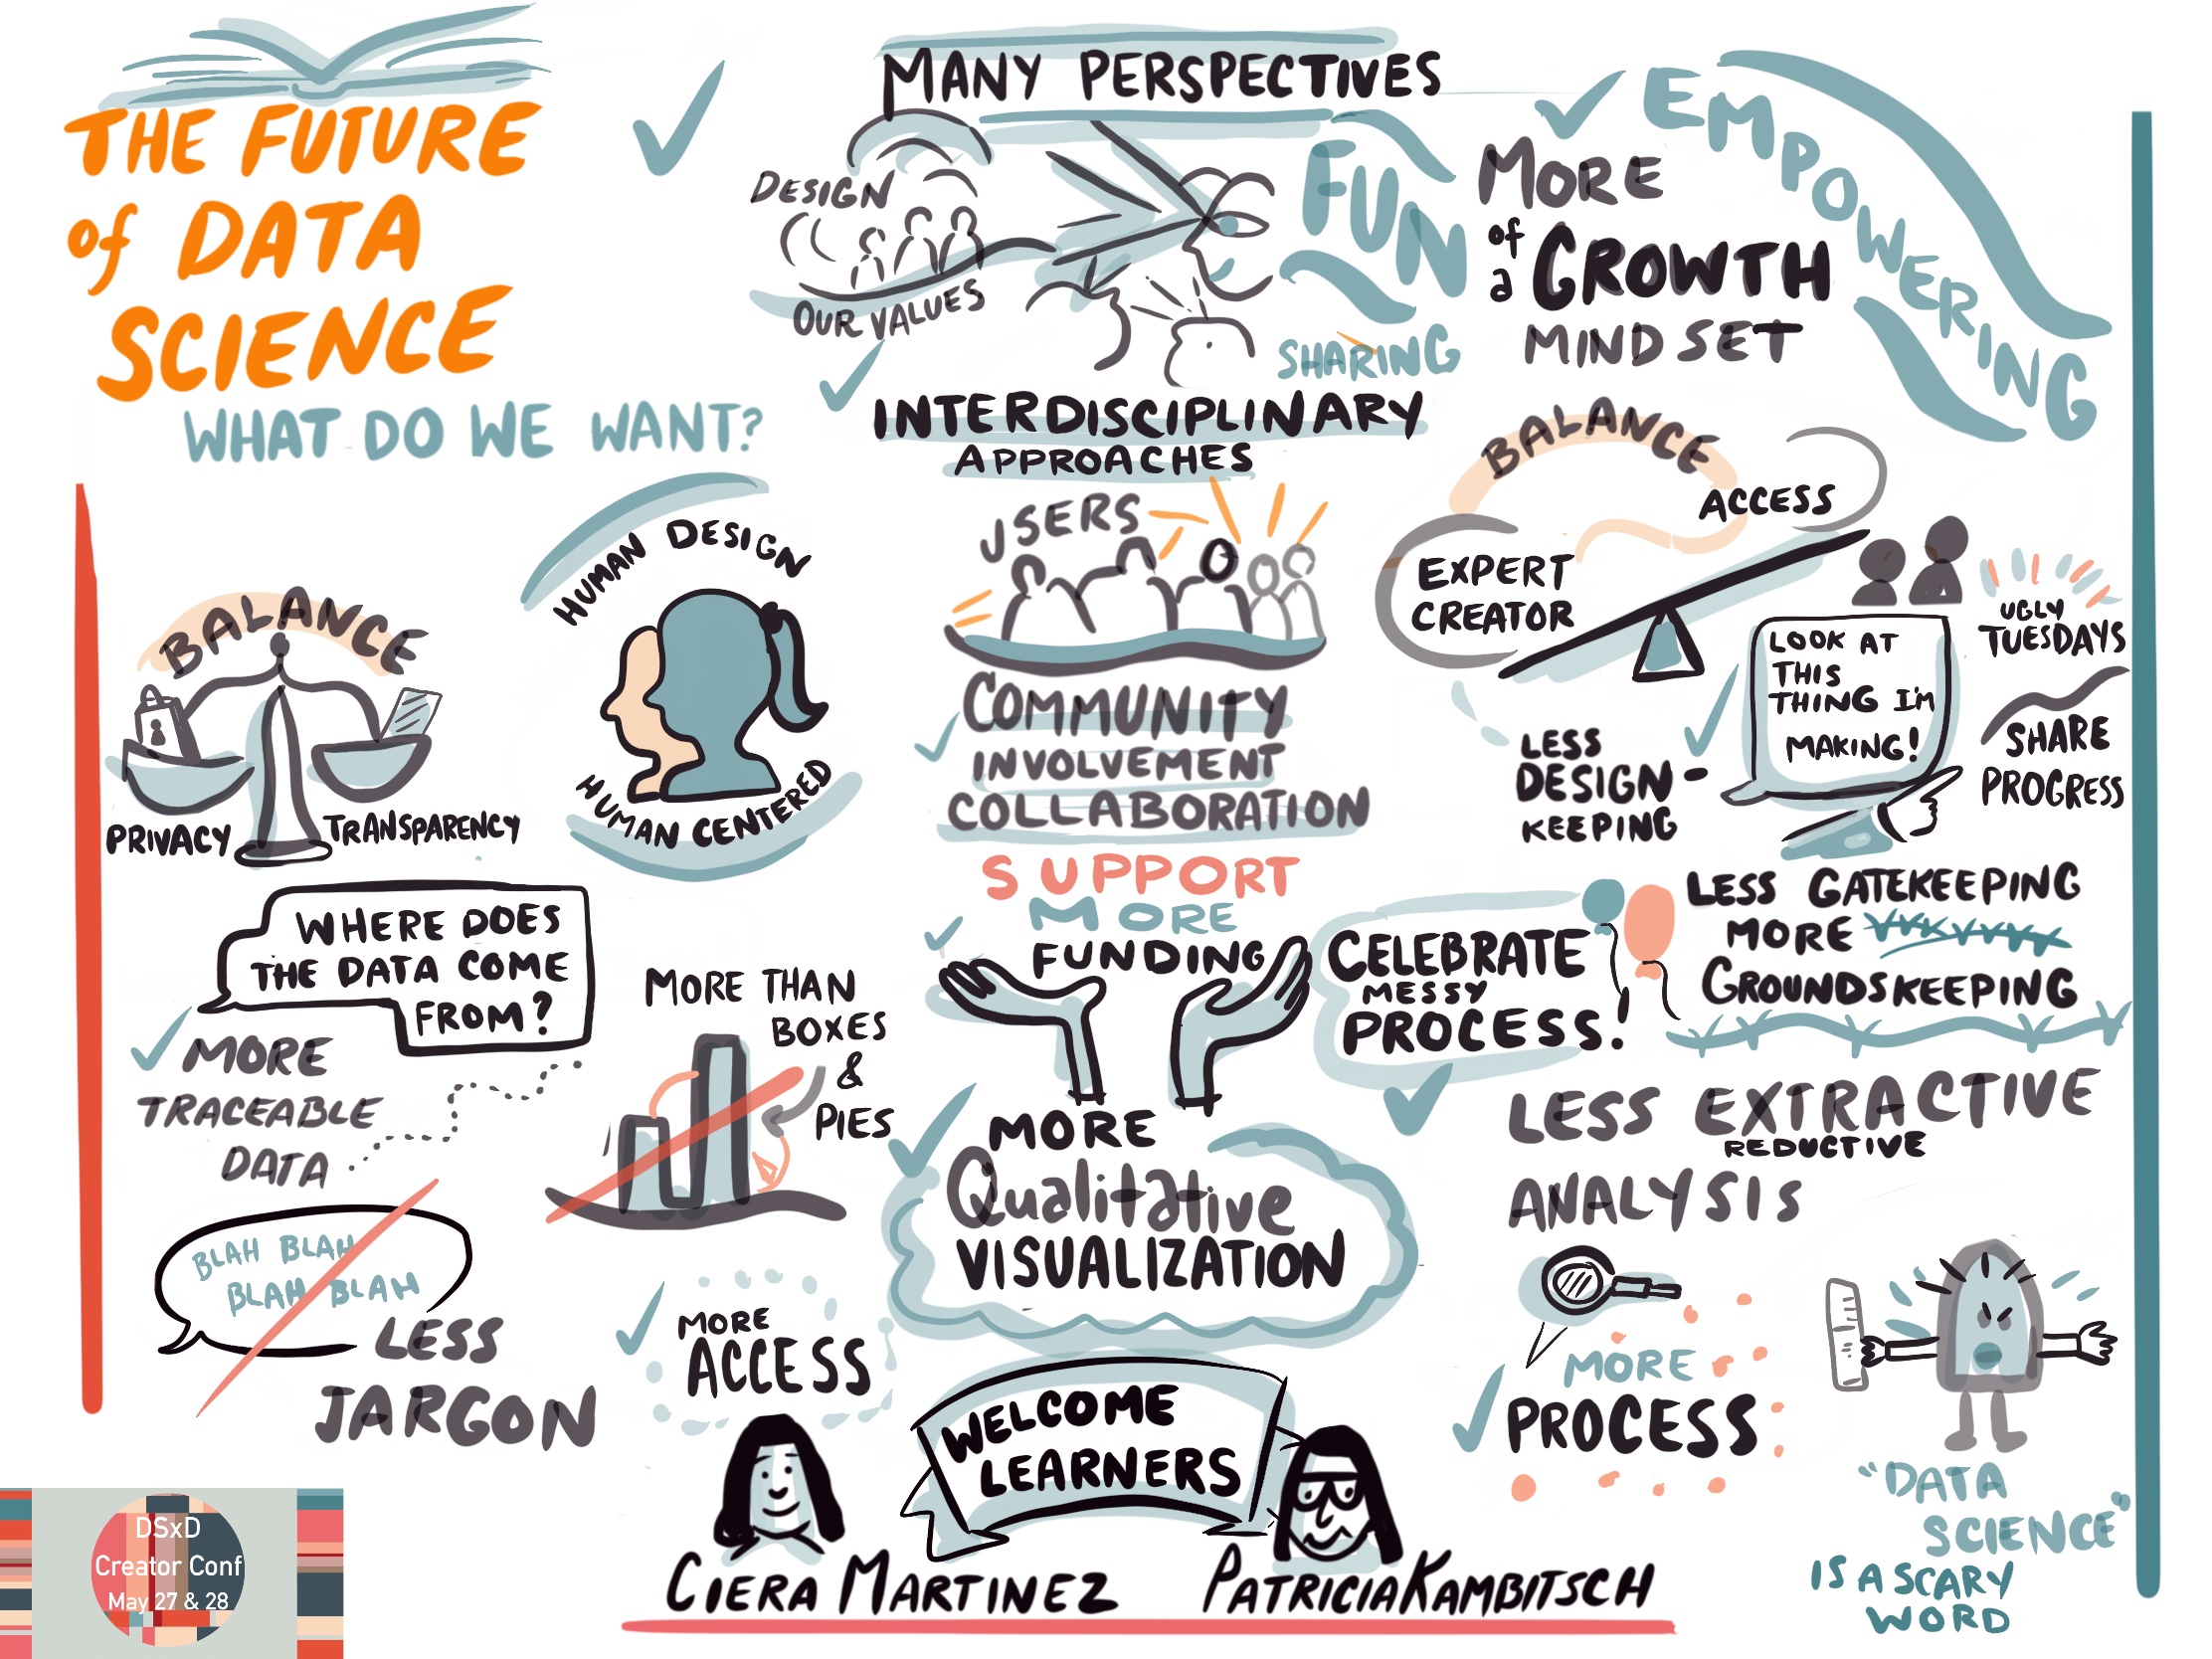 Future of Data Science: how do we want to design for the future of data science? Balance, Celebration of the messy process, more qualitative visualization, less gatekeeping more groundkeeping, less jargon, more traceable data, human centered design and more! 